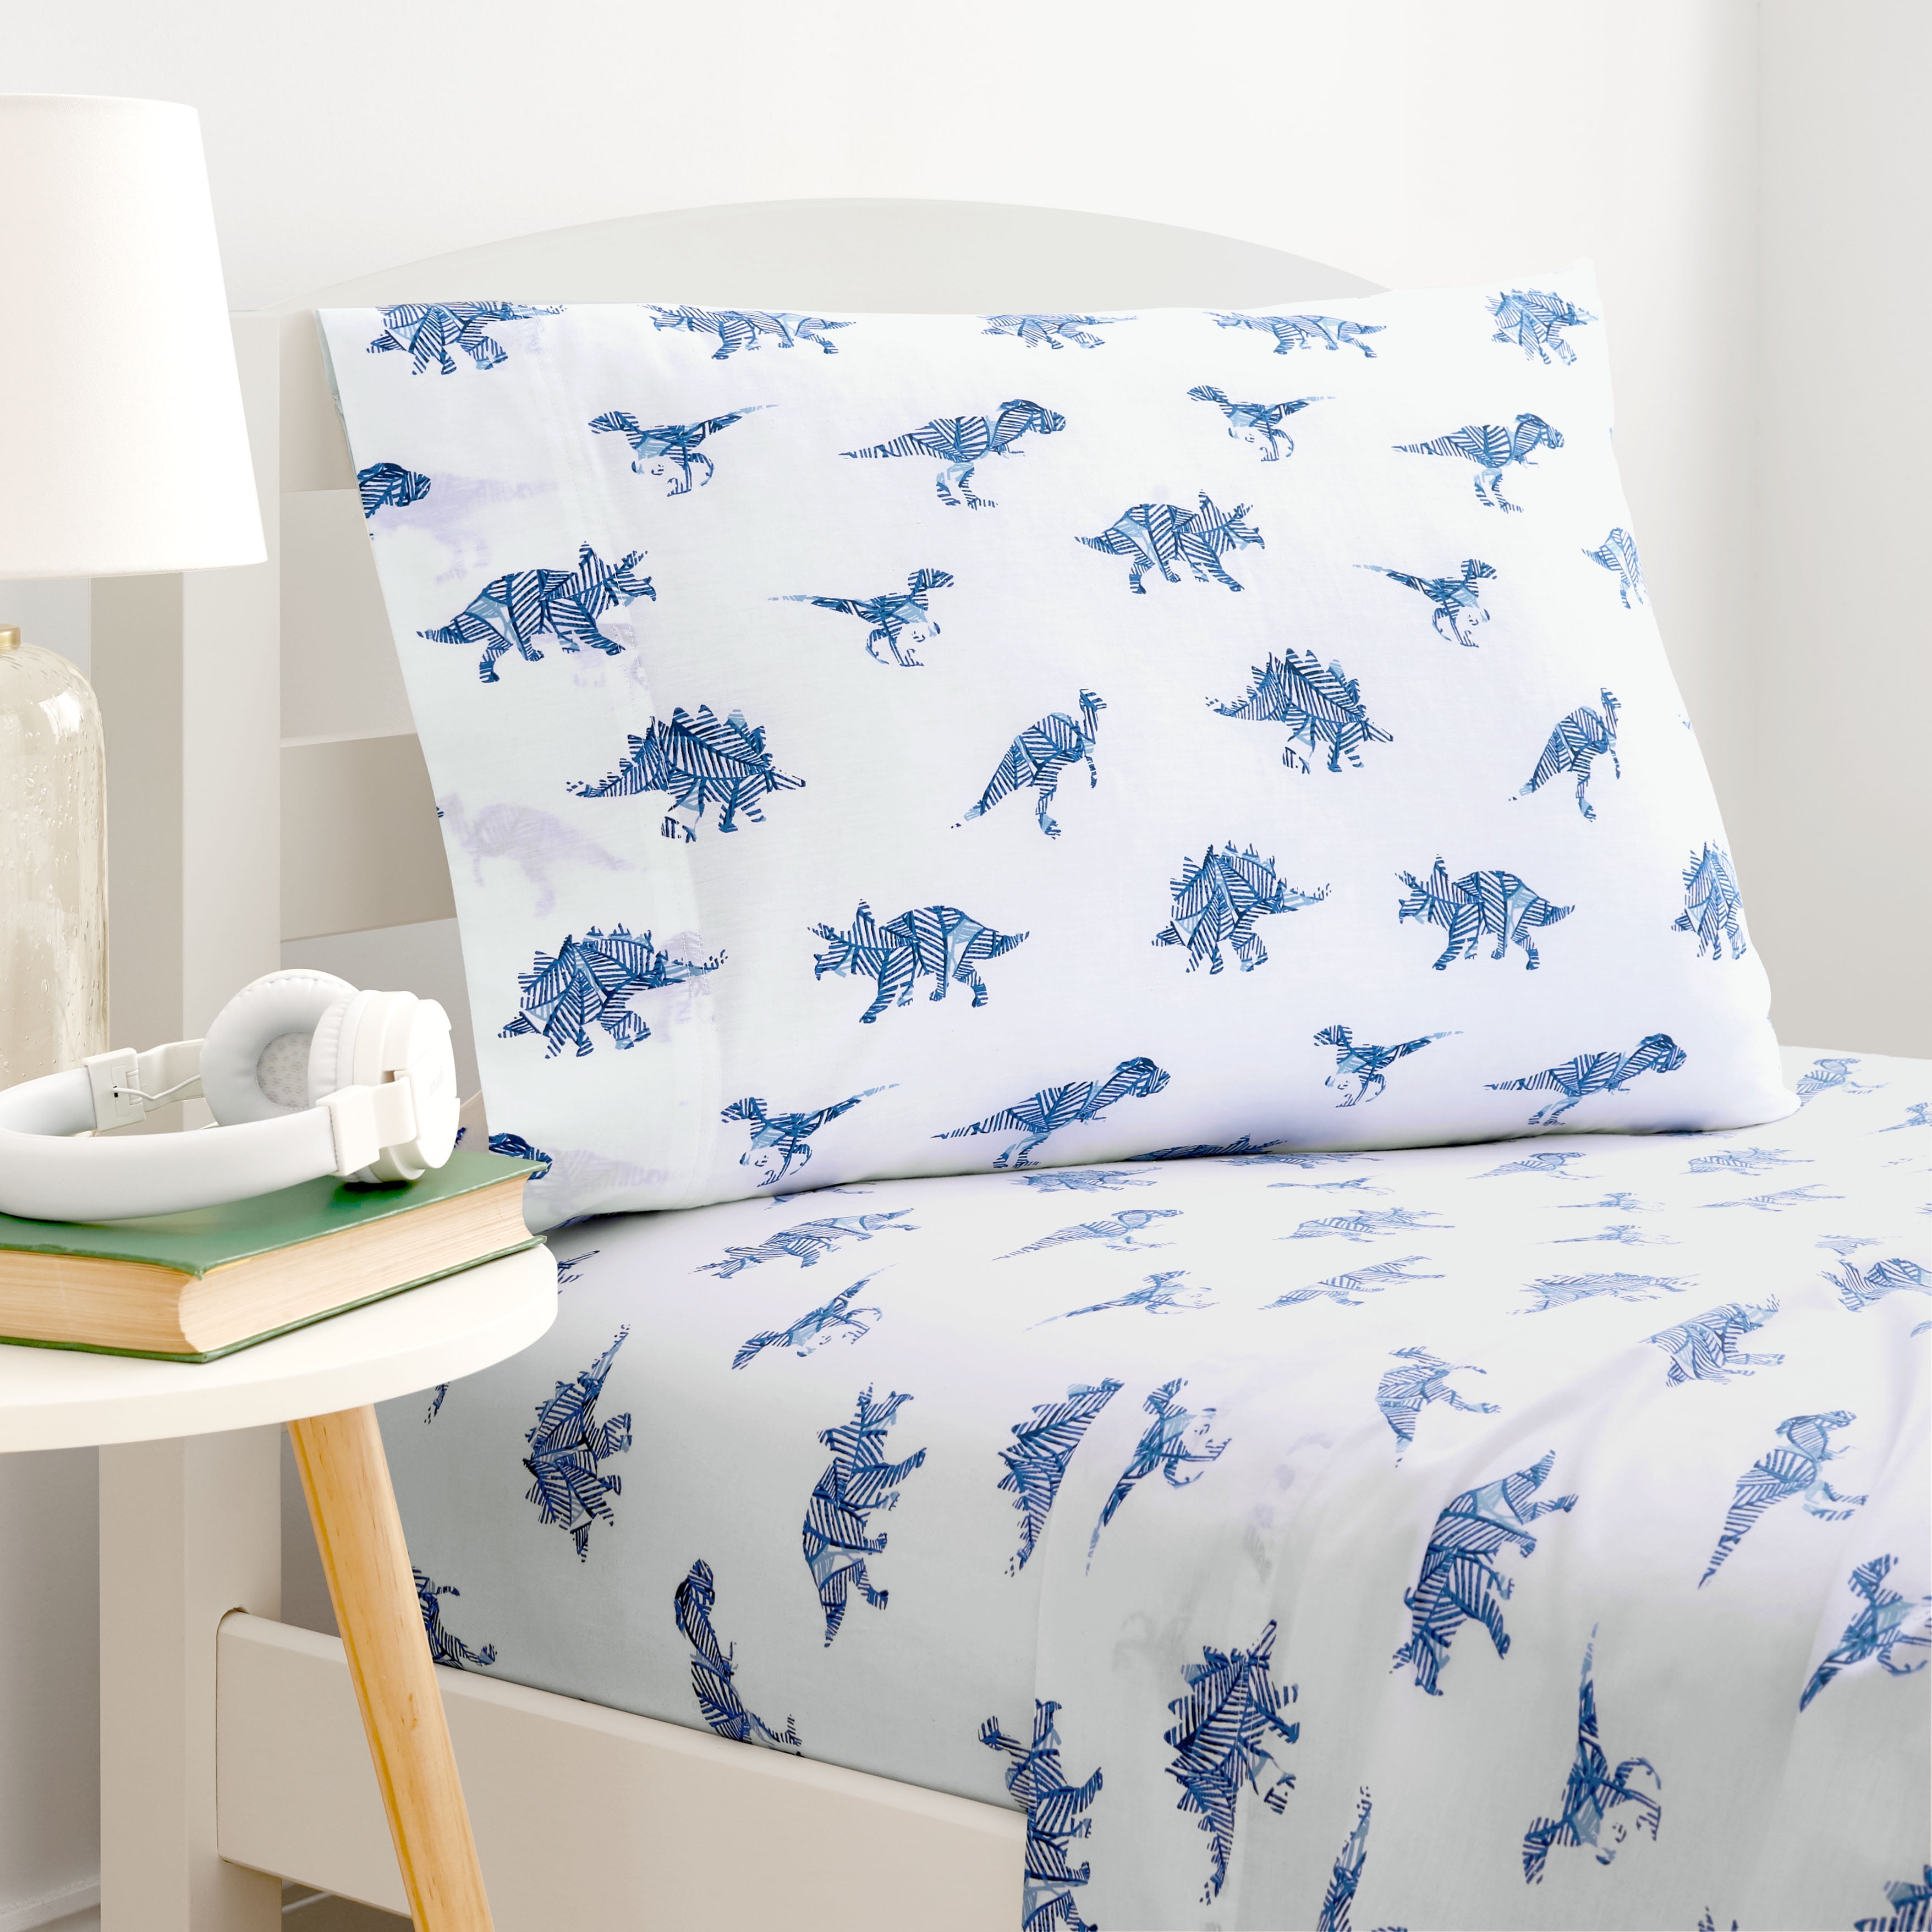 Dinosaur Quilt Covers Dinosaurs Lampshades Ideal to Match Dinosaur Duvet Covers 